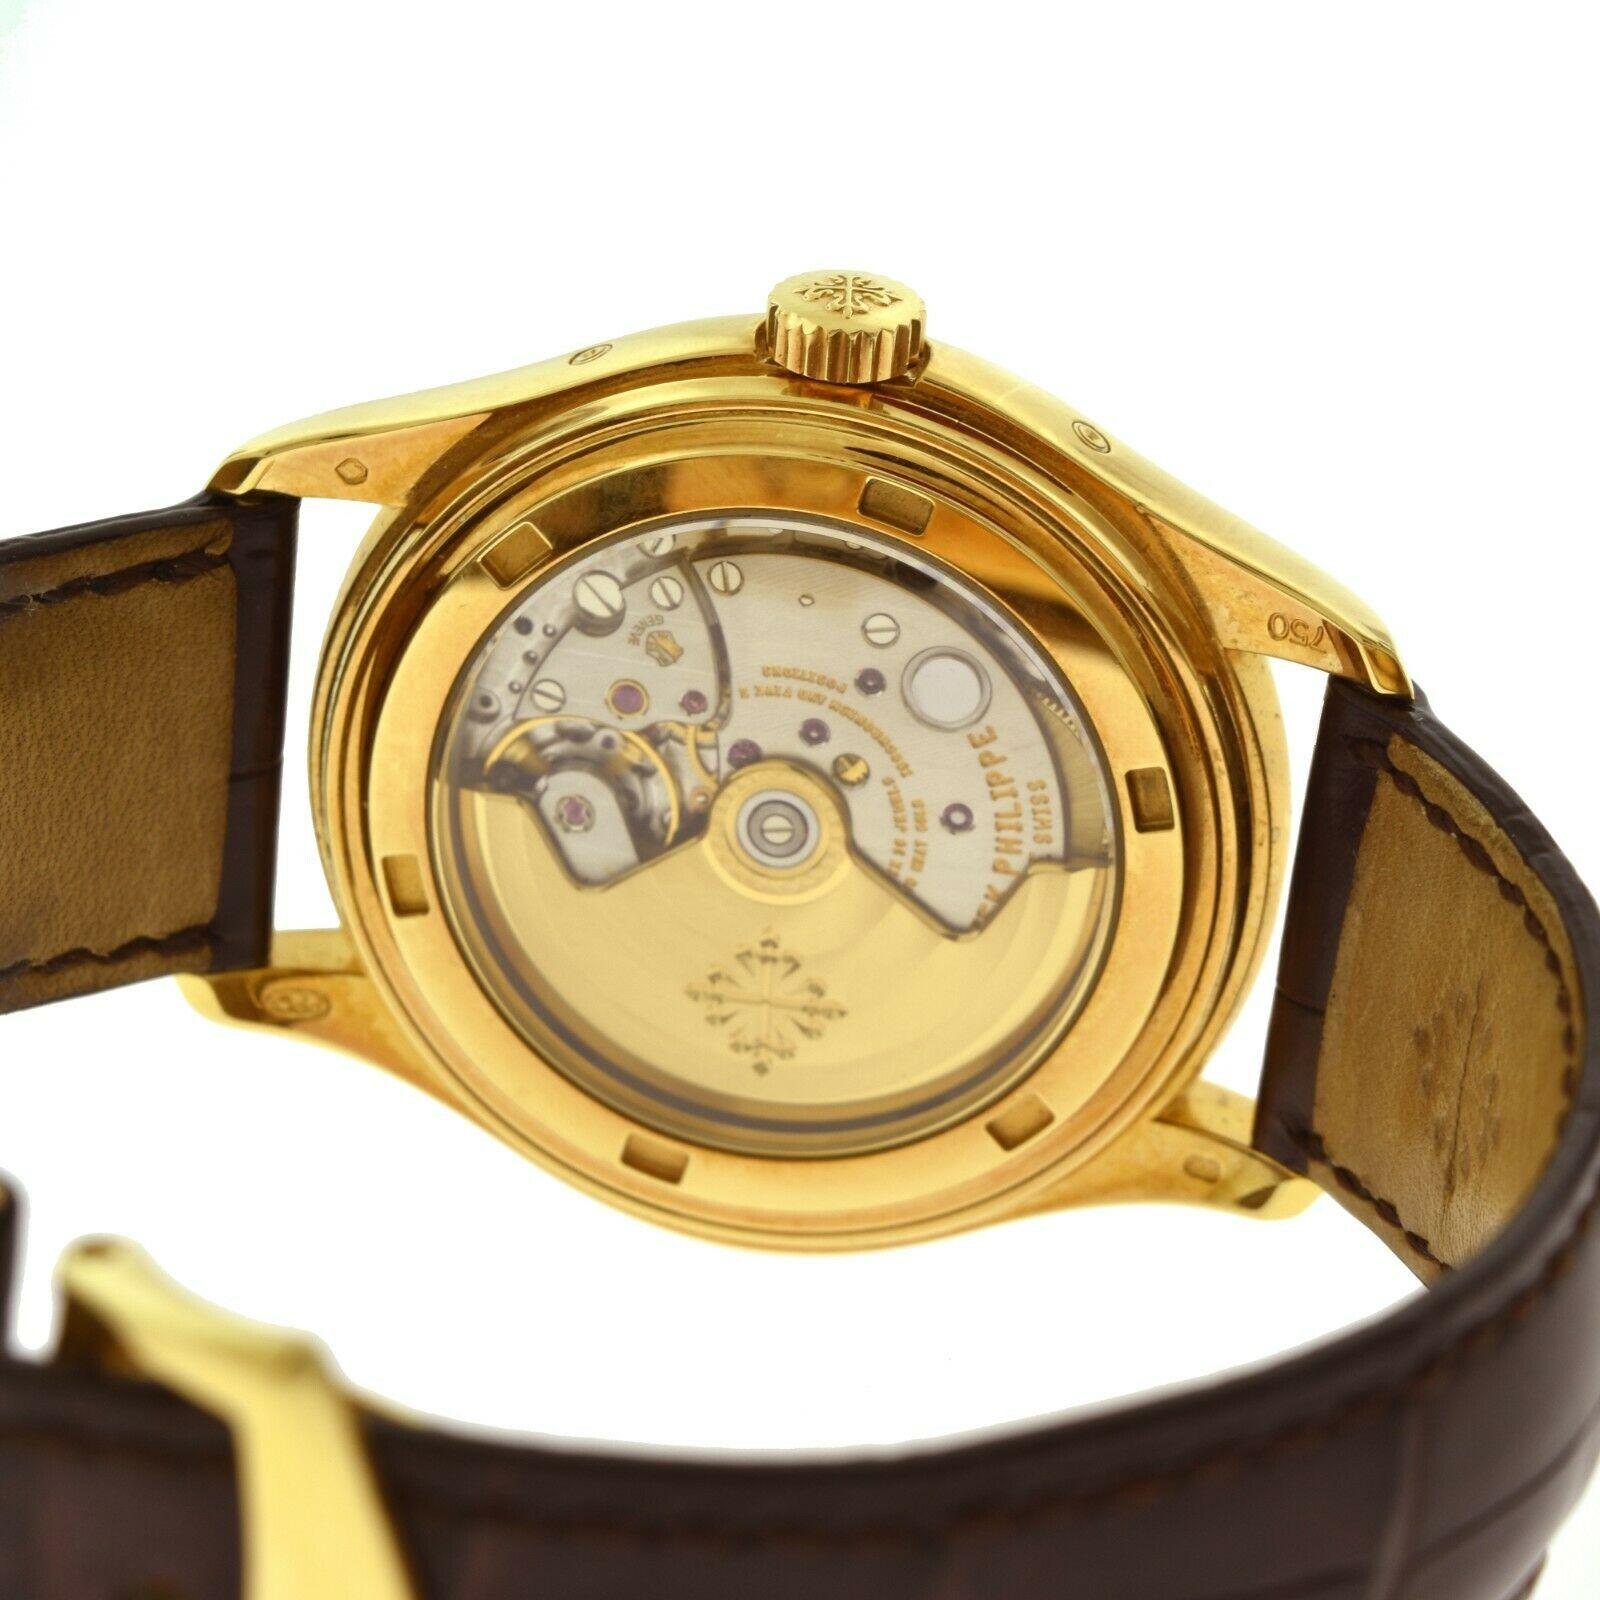 Brilliance Jewels, Miami
Questions? Call Us Anytime!
786,482,8100

Brand: Patek Philippe

Series: Complications Annual Calendar

Model Number: 5146J

Movement:  Automatic

Case Size: 39 mm

Dial Color: Grey

Case Material: 18k Yellow Gold